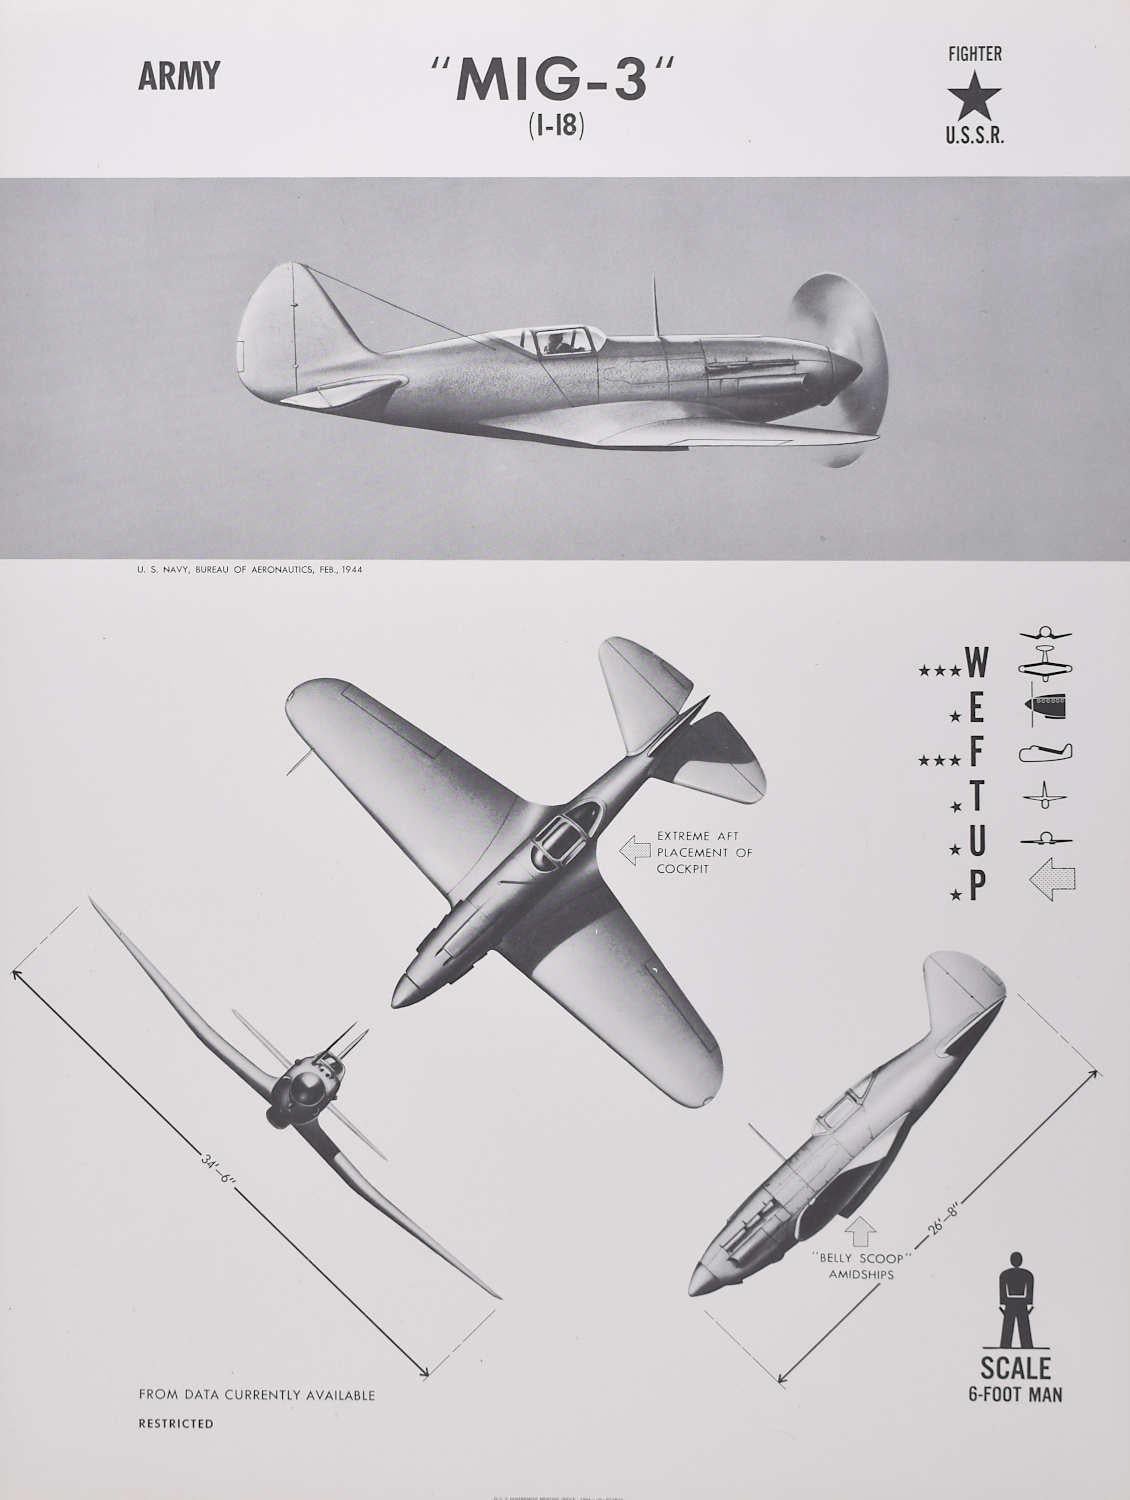 1944 "MIG-3" Russian USSR fighter plane identification poster WW2 - Print by Unknown